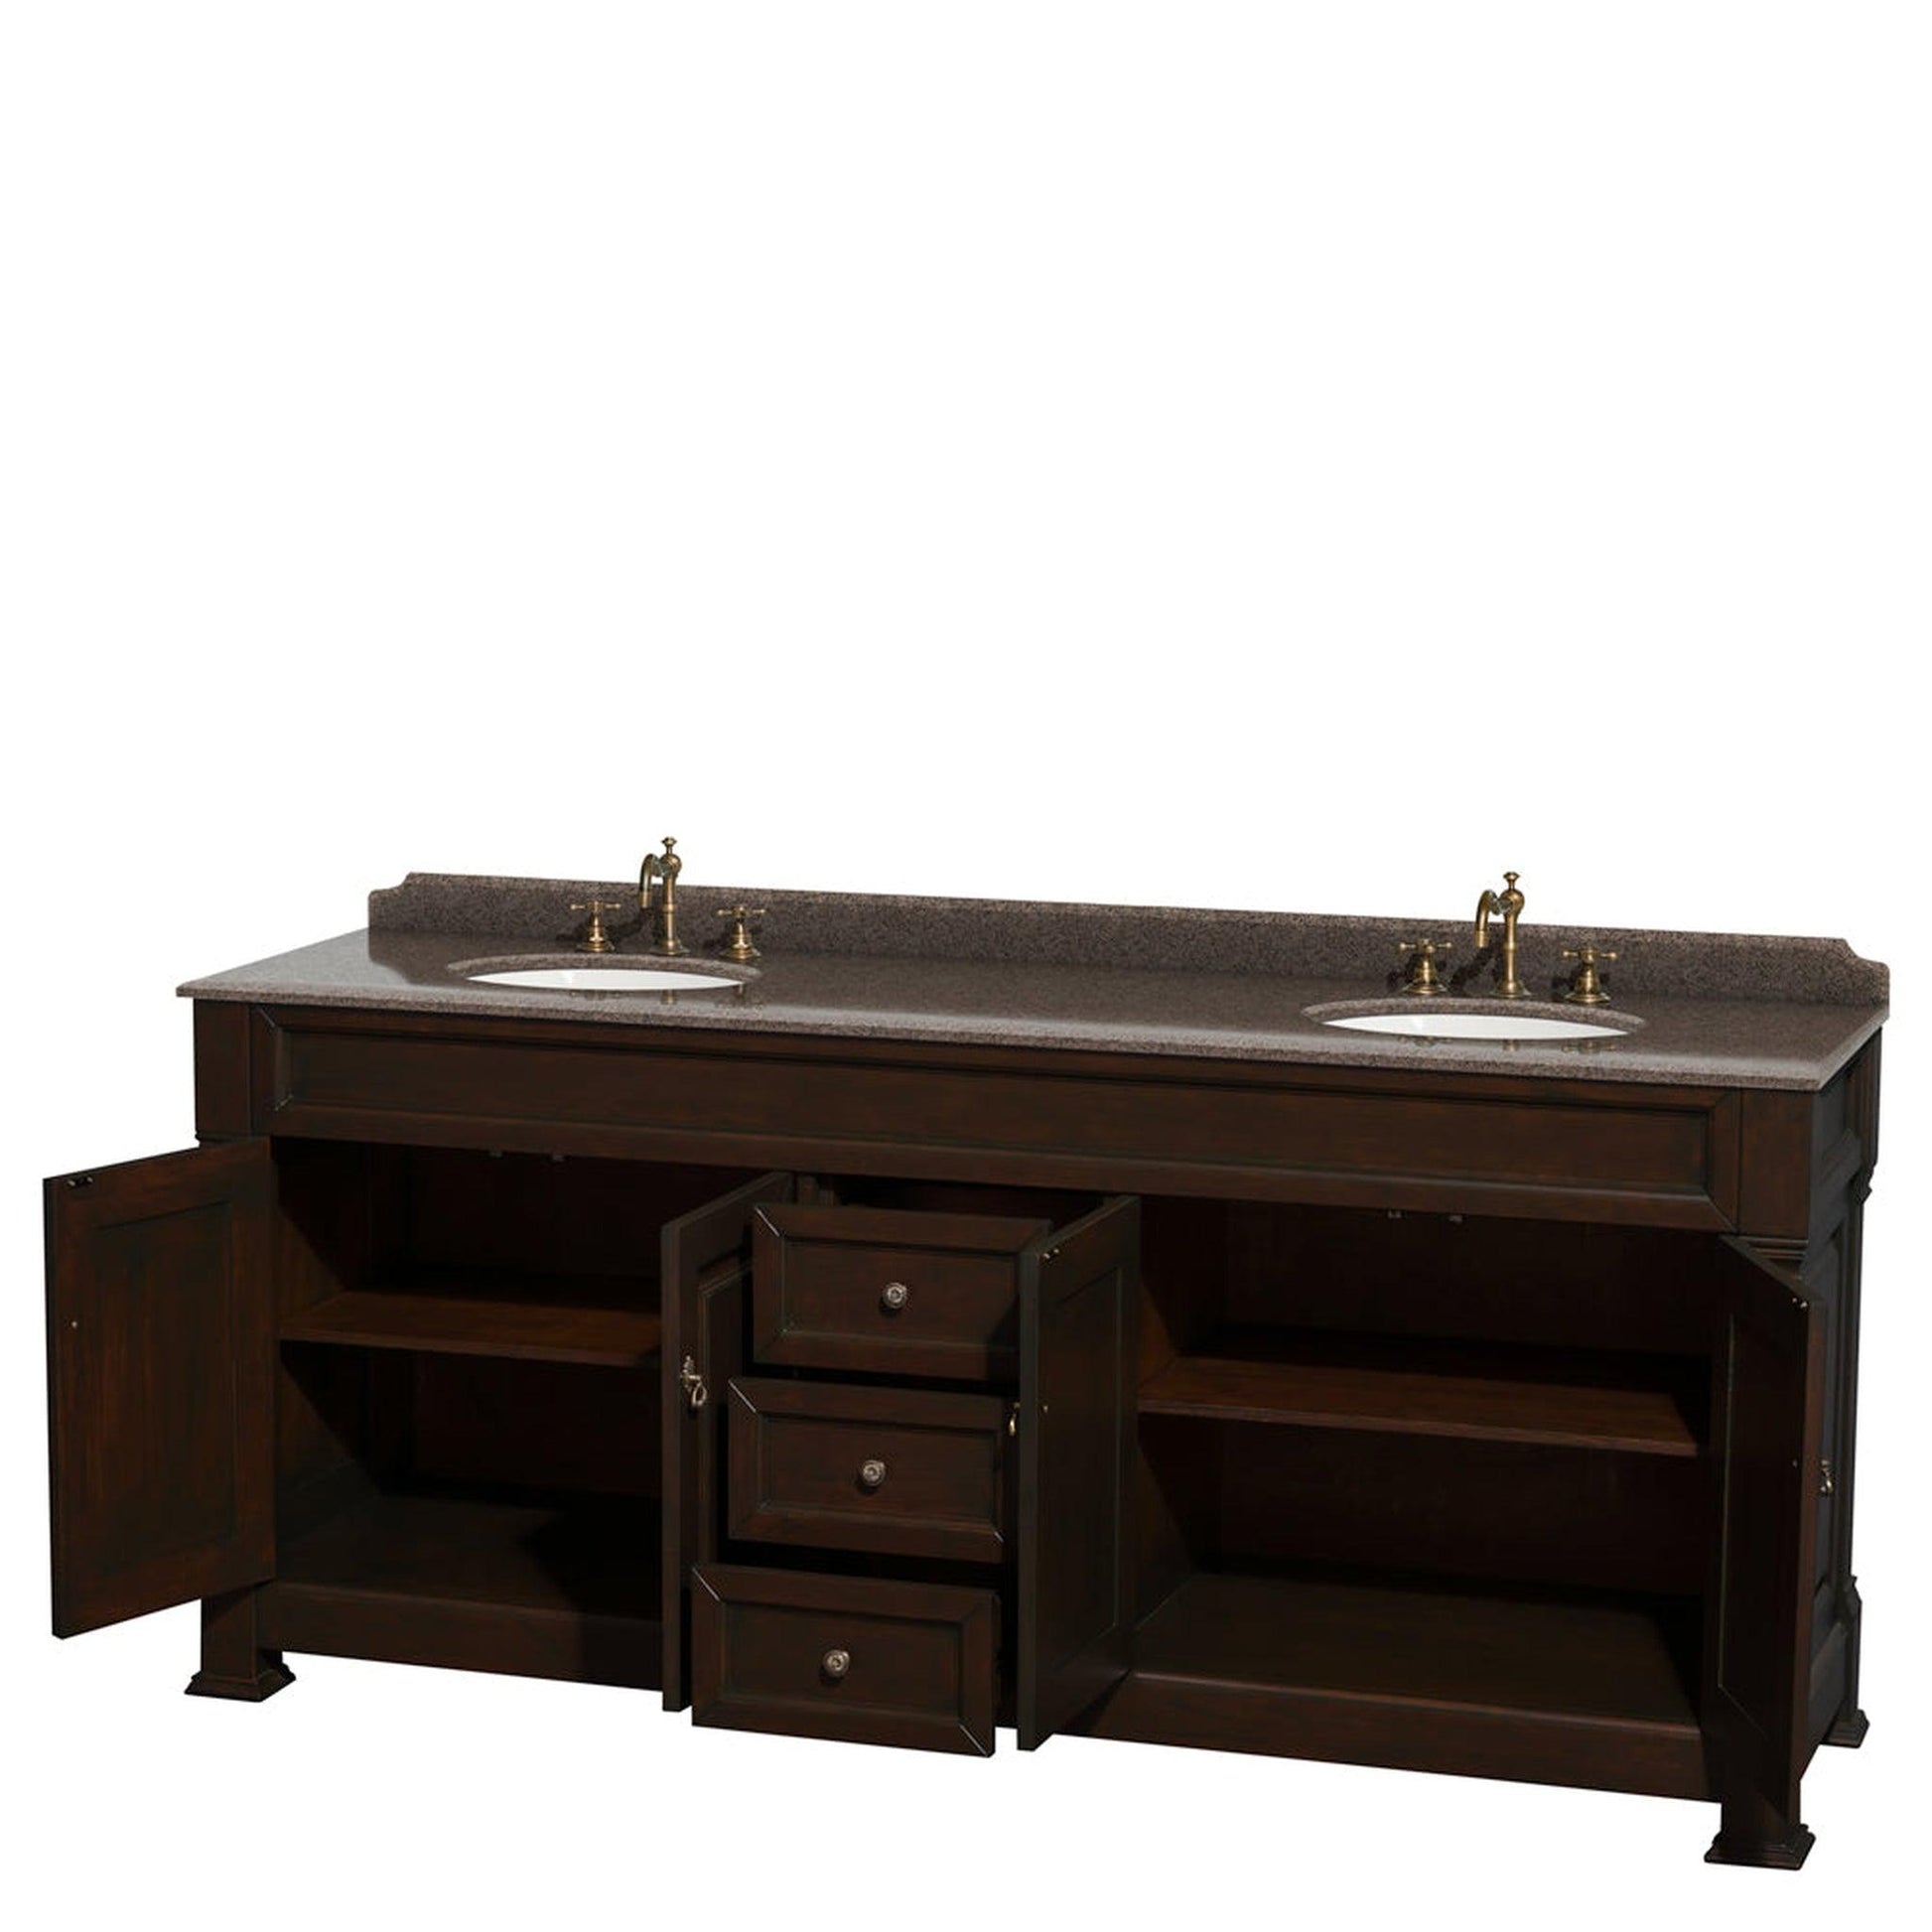 Wyndham Collection Andover 80" Double Bathroom Vanity in Dark Cherry With Imperial Brown Granite Countertop & Undermount Oval Sink